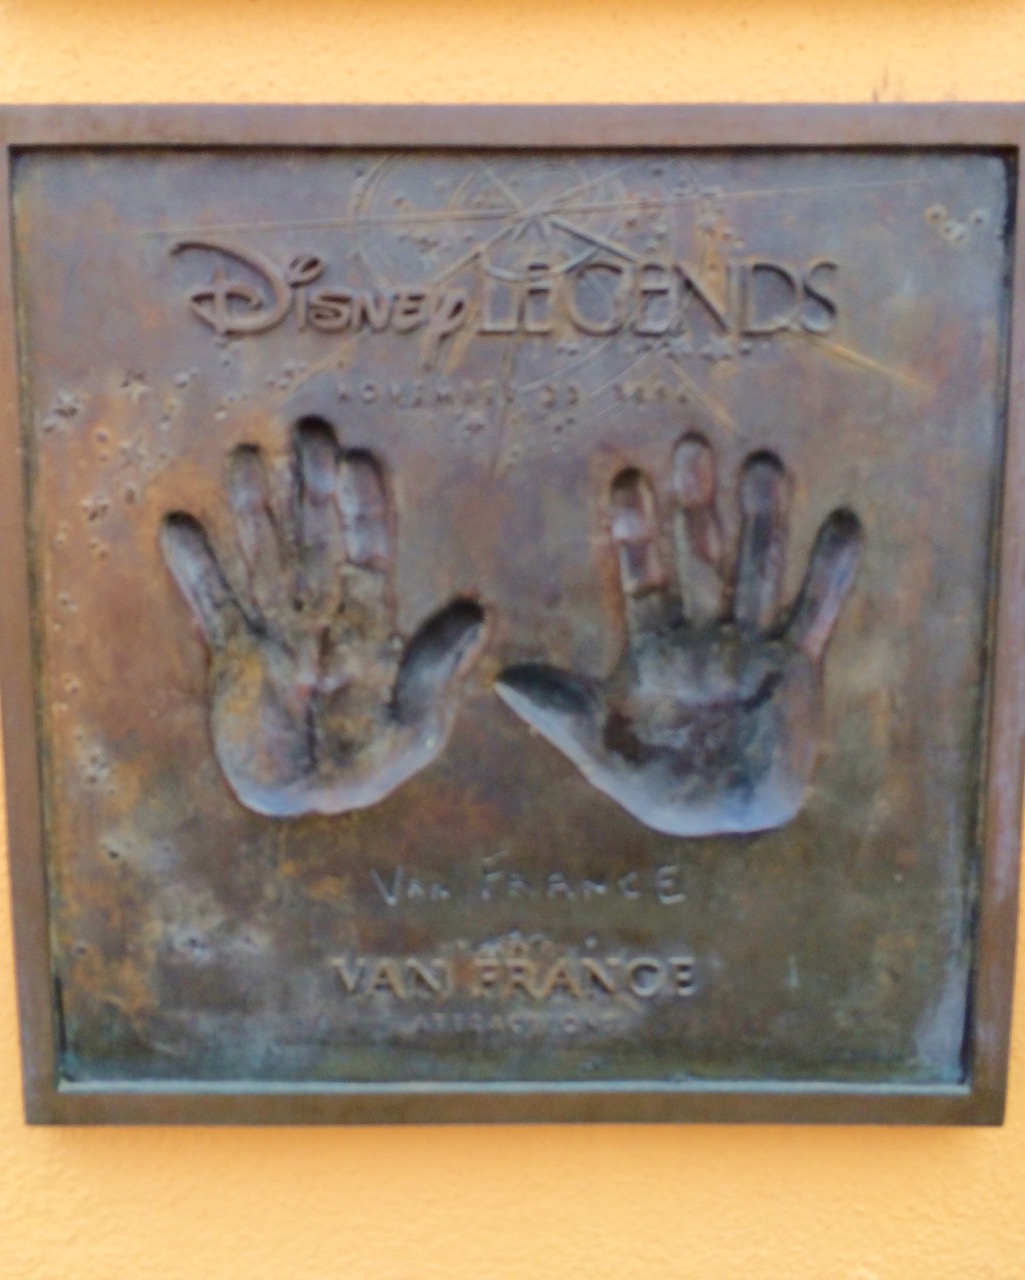 The hands of Van France, founder of The Disney University.